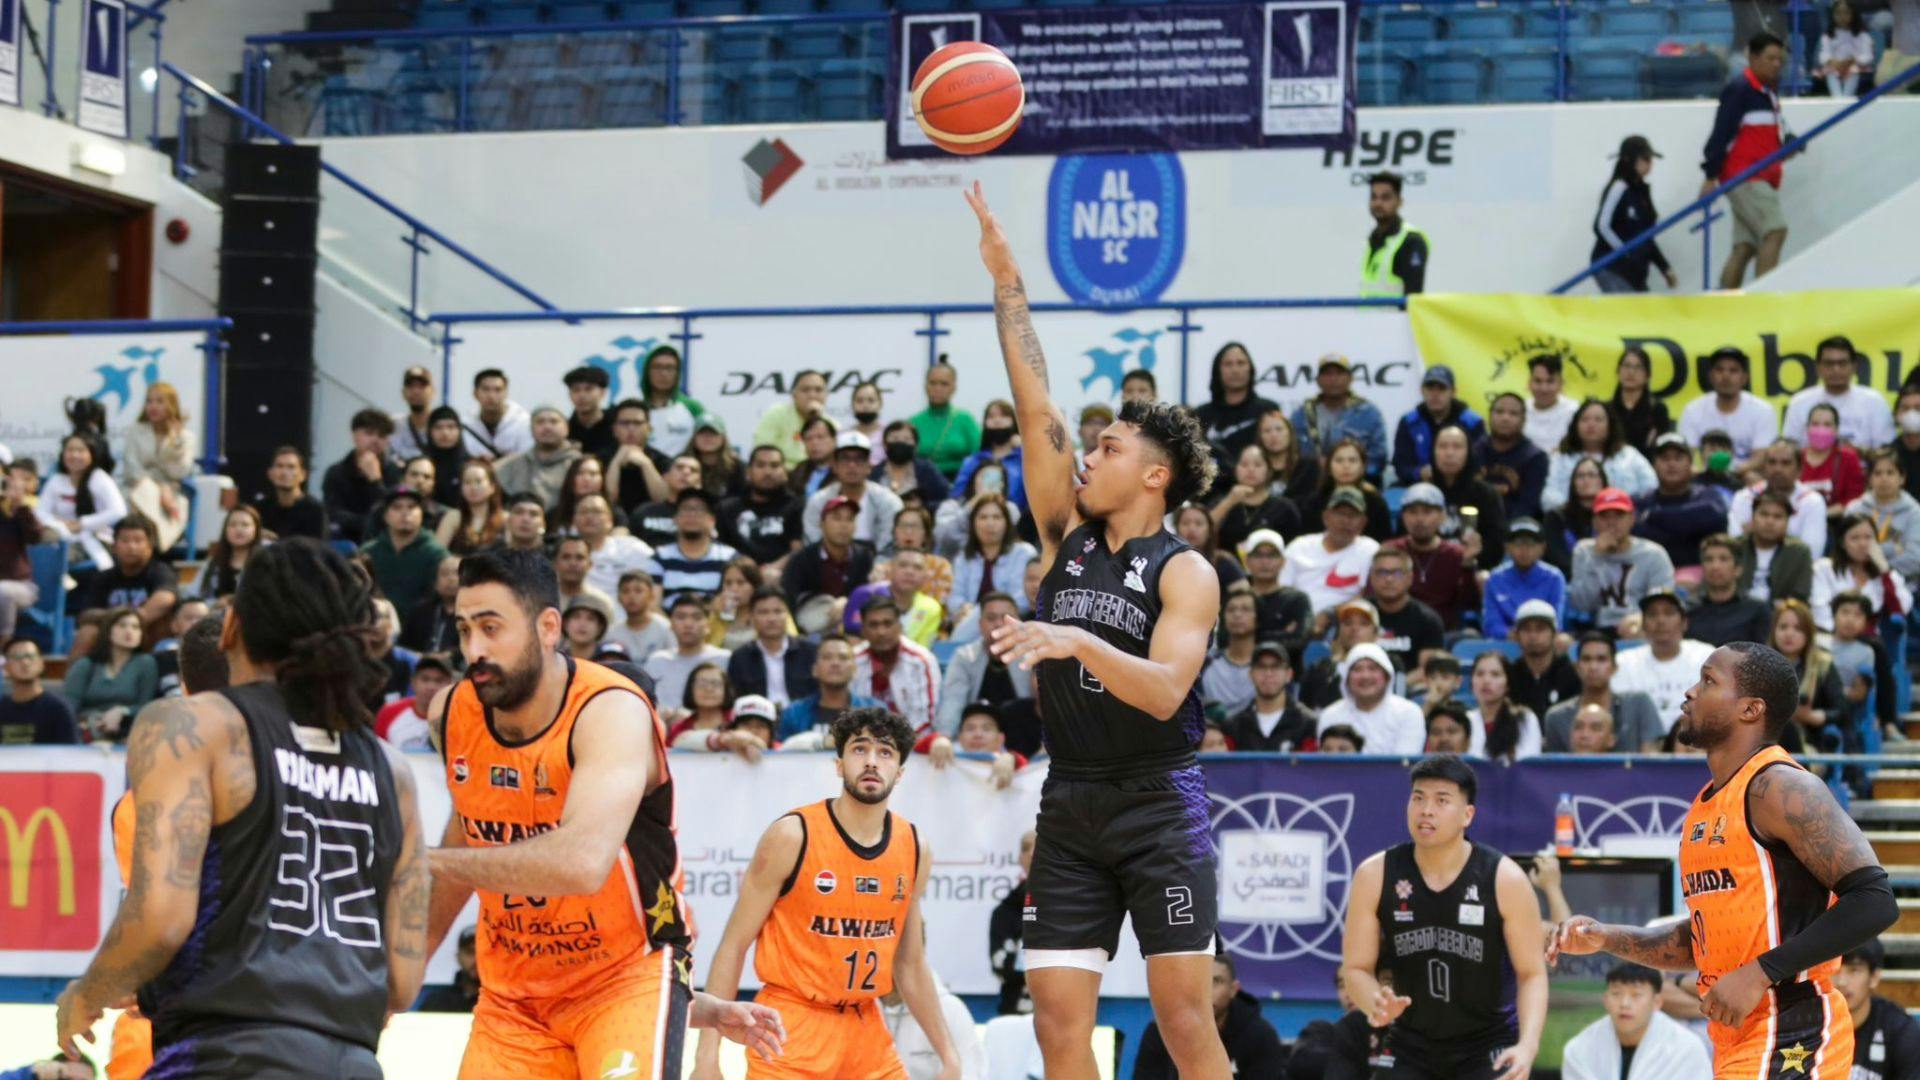 Strong Group looking to bounce back ahead of knockout quarterfinals in Dubai tilt